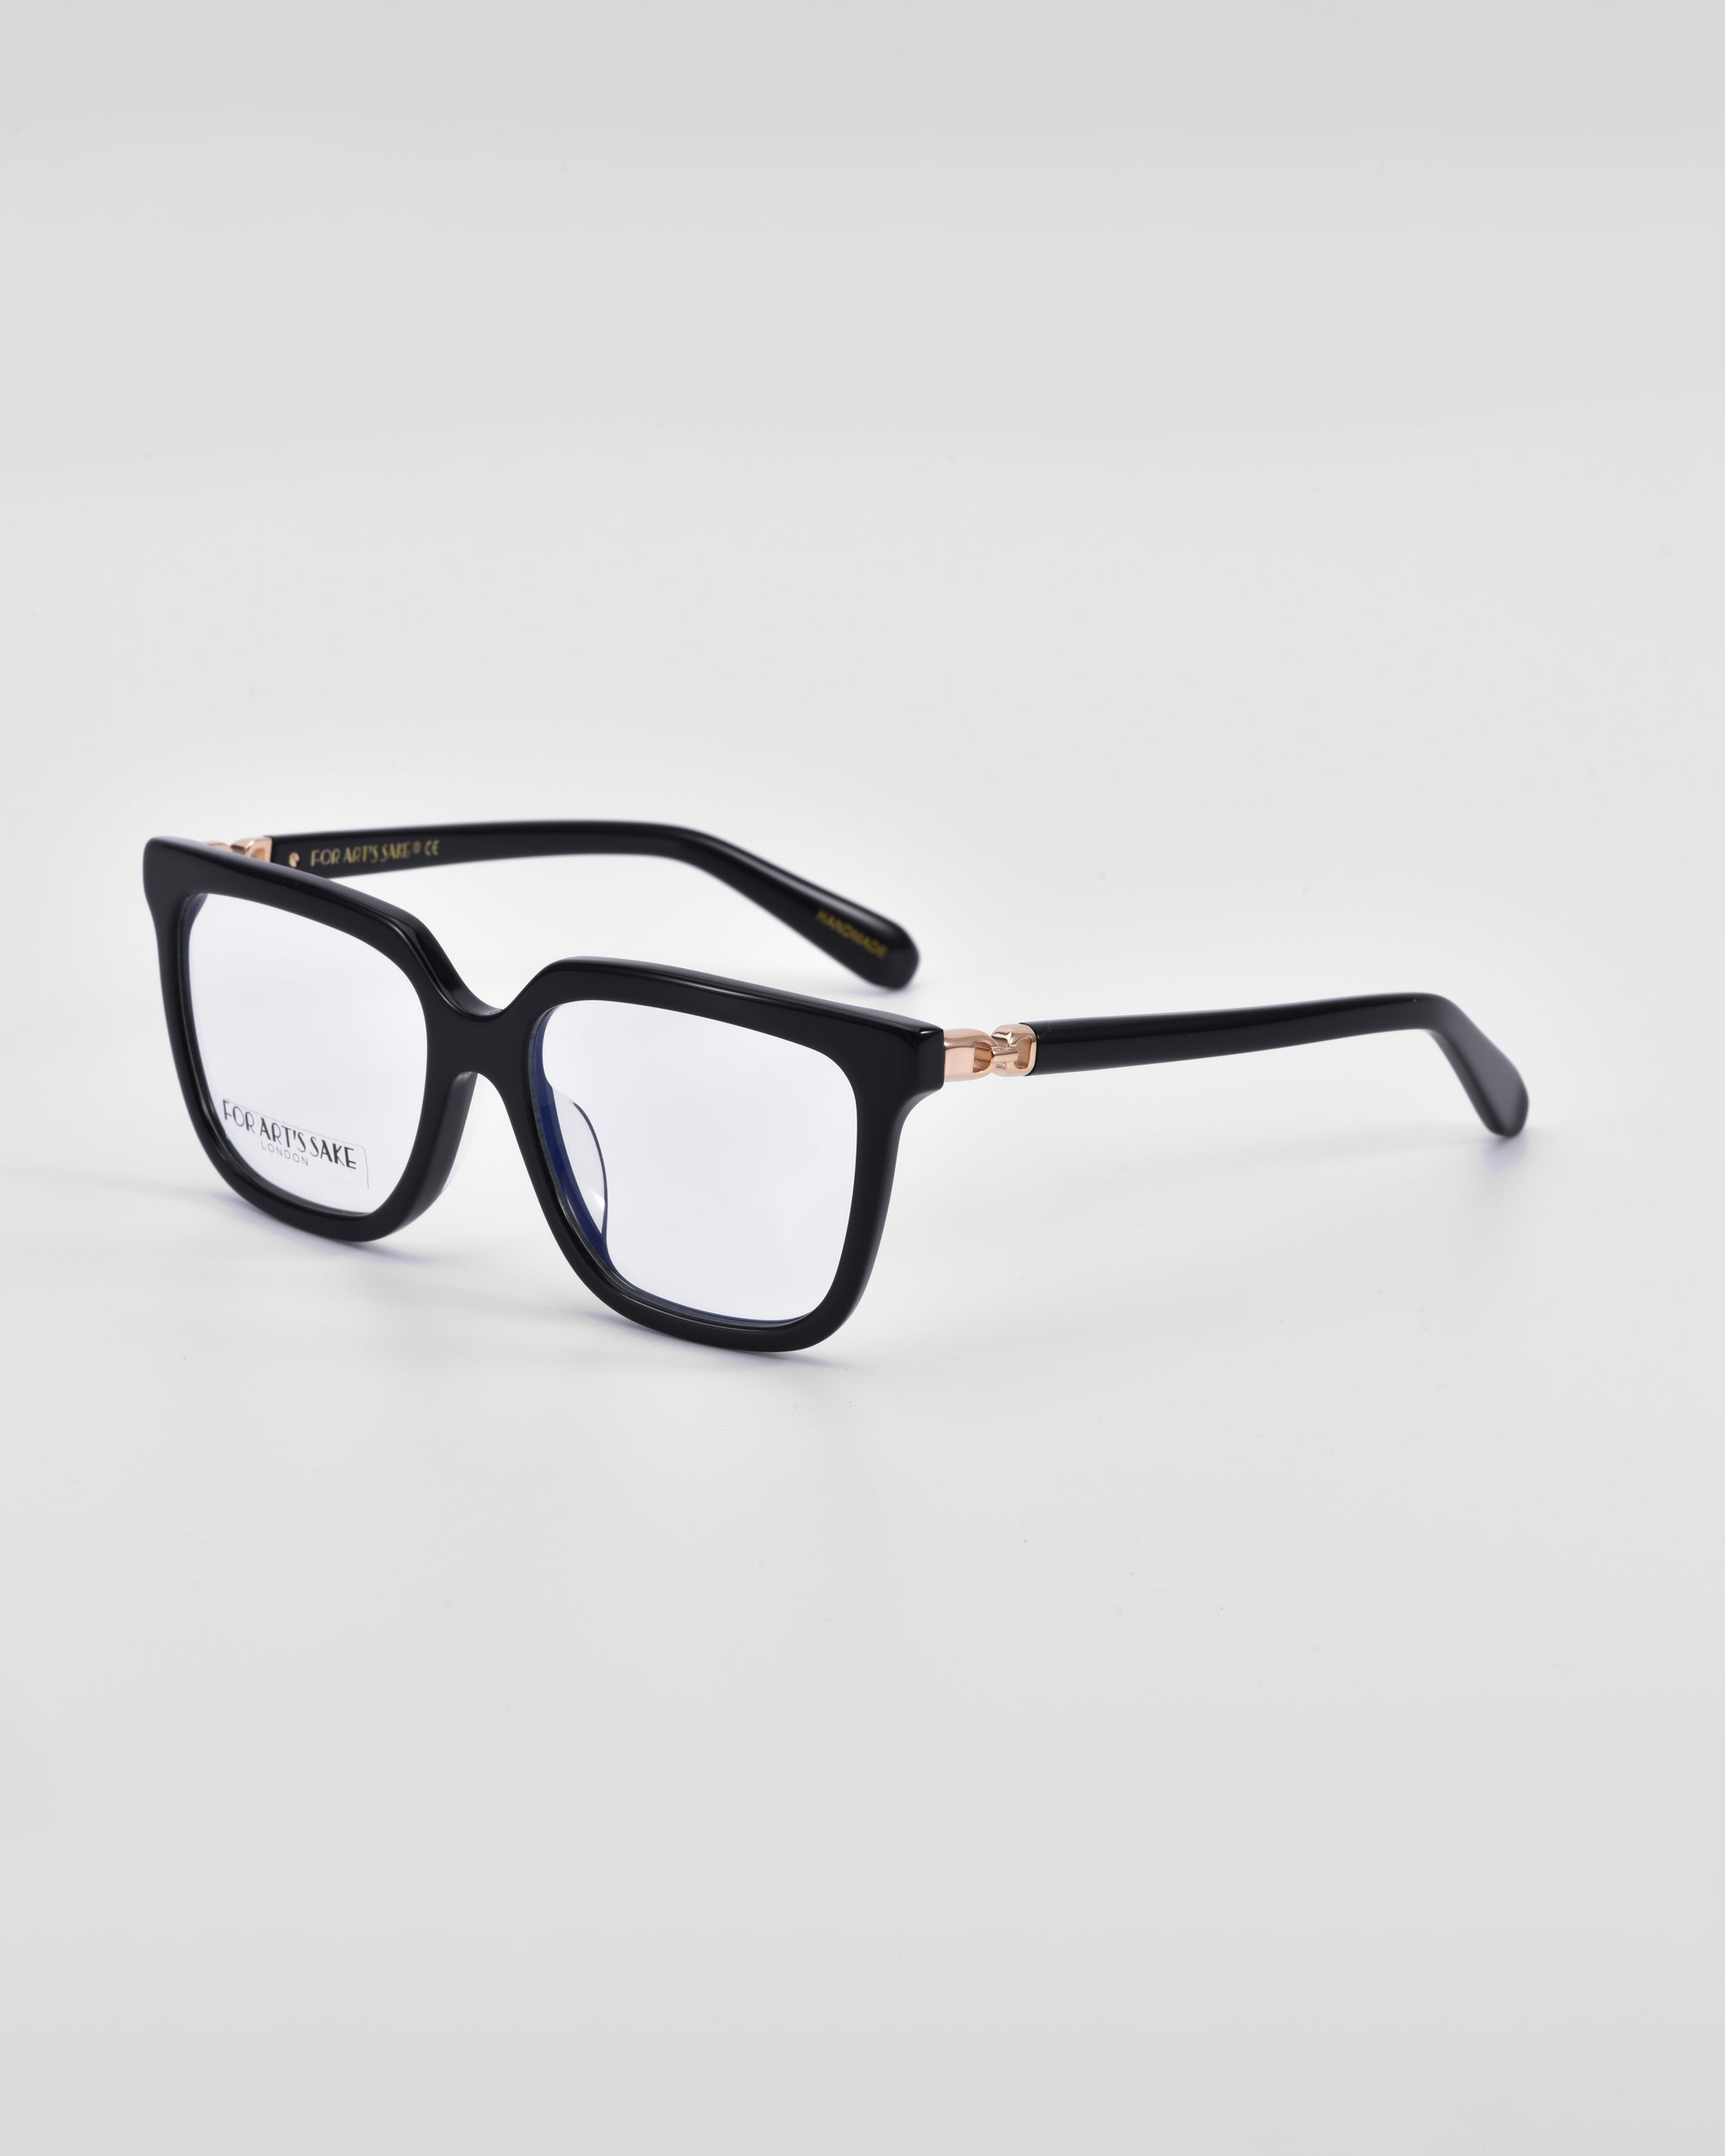 A pair of black rectangular eyeglasses with thick frames is shown on a plain white background. The glasses feature clear lenses and a small 18-karat gold hinge detail on the temples, combining luxury with a classic square silhouette. These are the Nina by For Art&#39;s Sake®.